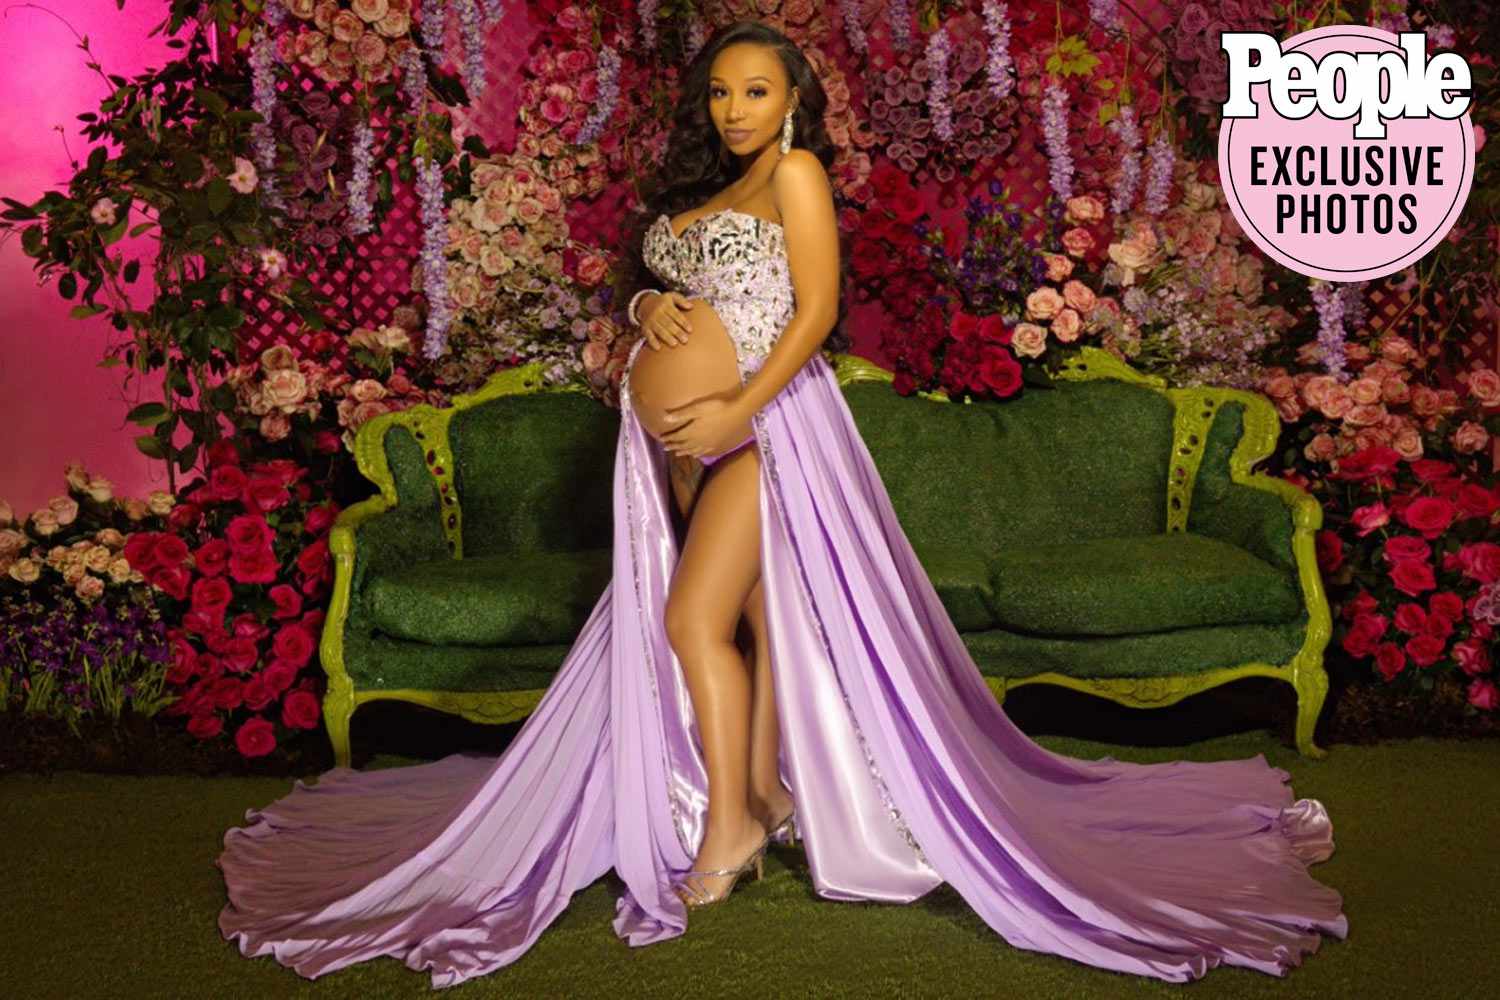 <p>The daughter of Tameka "Tiny" Harris and stepdaughter of T.I. gave birth to a daughter, her first child with boyfriend Bandhunta Izzy (né Israel James), on Dec. 16, according to The Mix, her Fox Soul talk show.</p>
                            <p>"Our princess 🎀 arrived this morning at 6:27am, weighing in at 8lbs 8oz, and 21 inches long! We're so excited to meet our niece," the show posted on Instagram.</p>
                            <p>While Zonnique's co-host Romeo Miller did not share the name of her child, he said that her colleagues "already know she's a beautiful, amazing, strong princess."</p>
                            